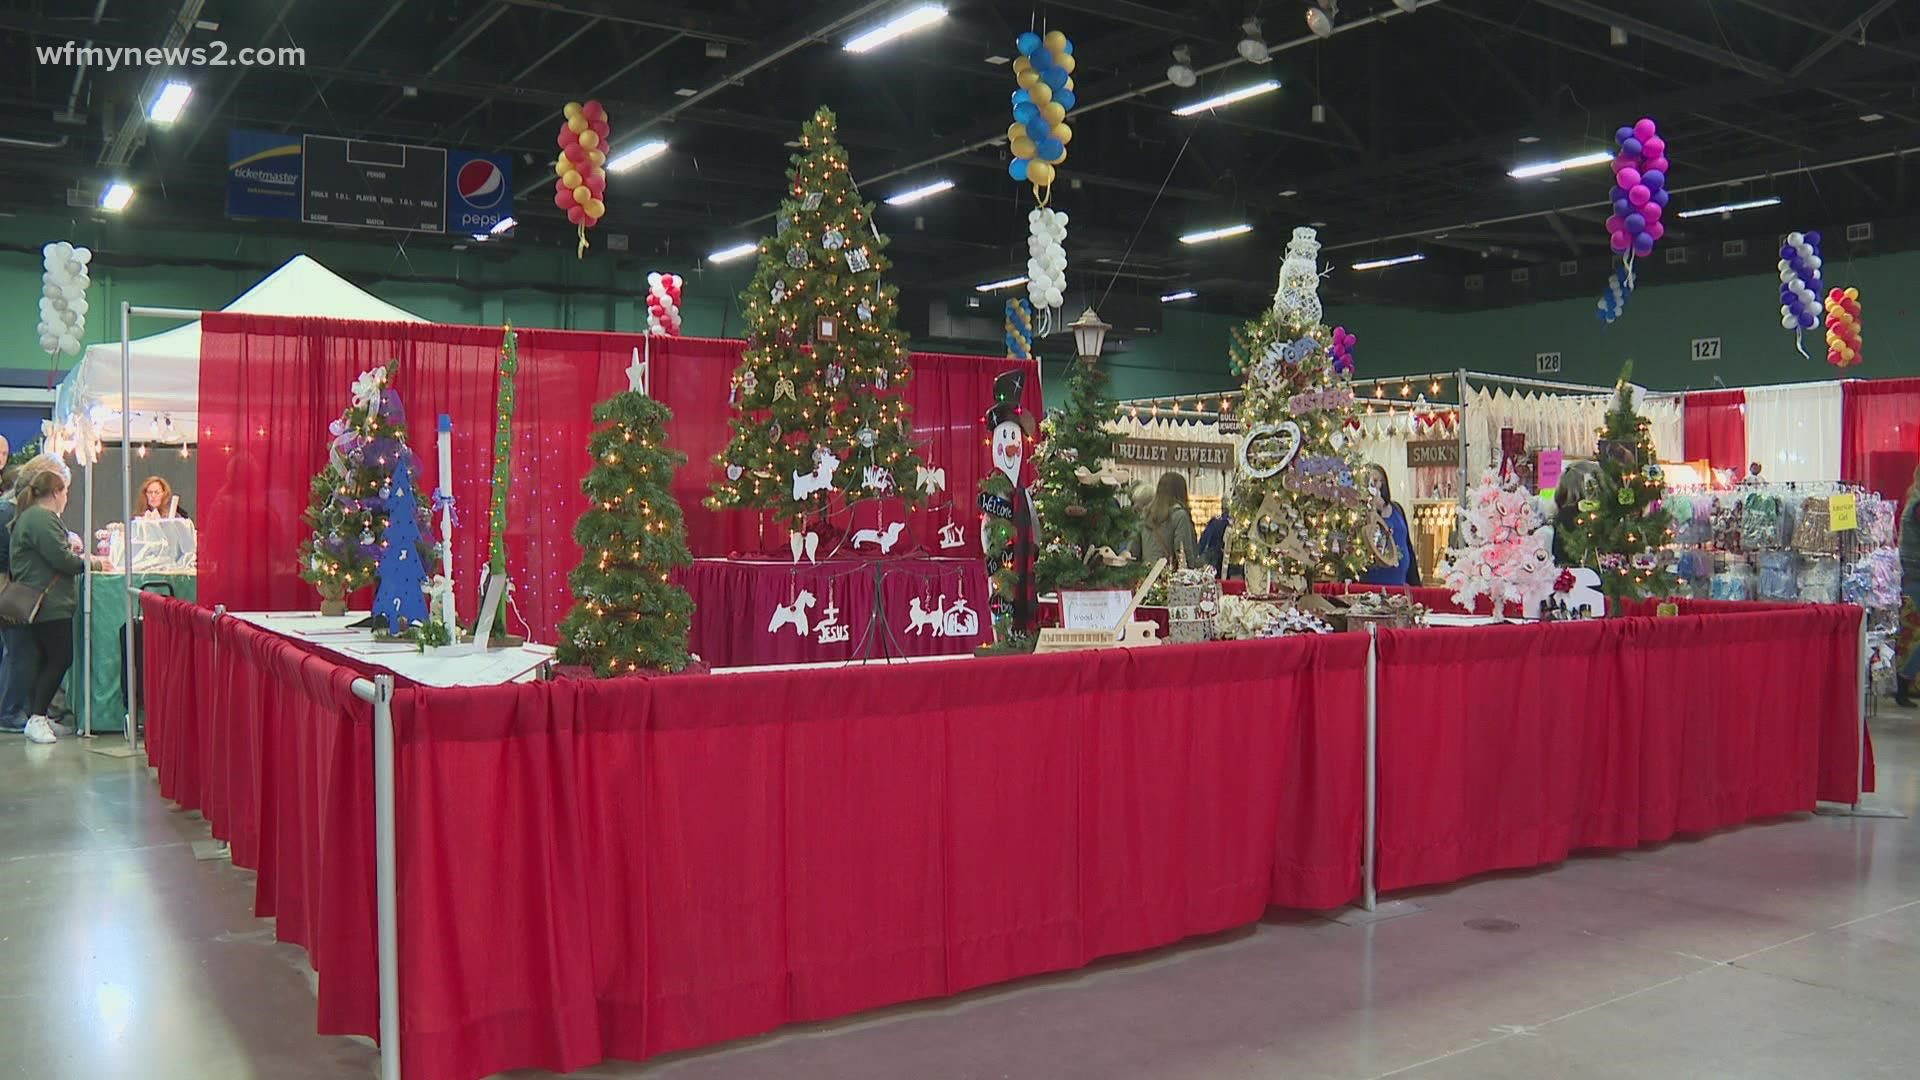 48th Annual Craftsmen's Classic Art and Crafts Festival Returns to